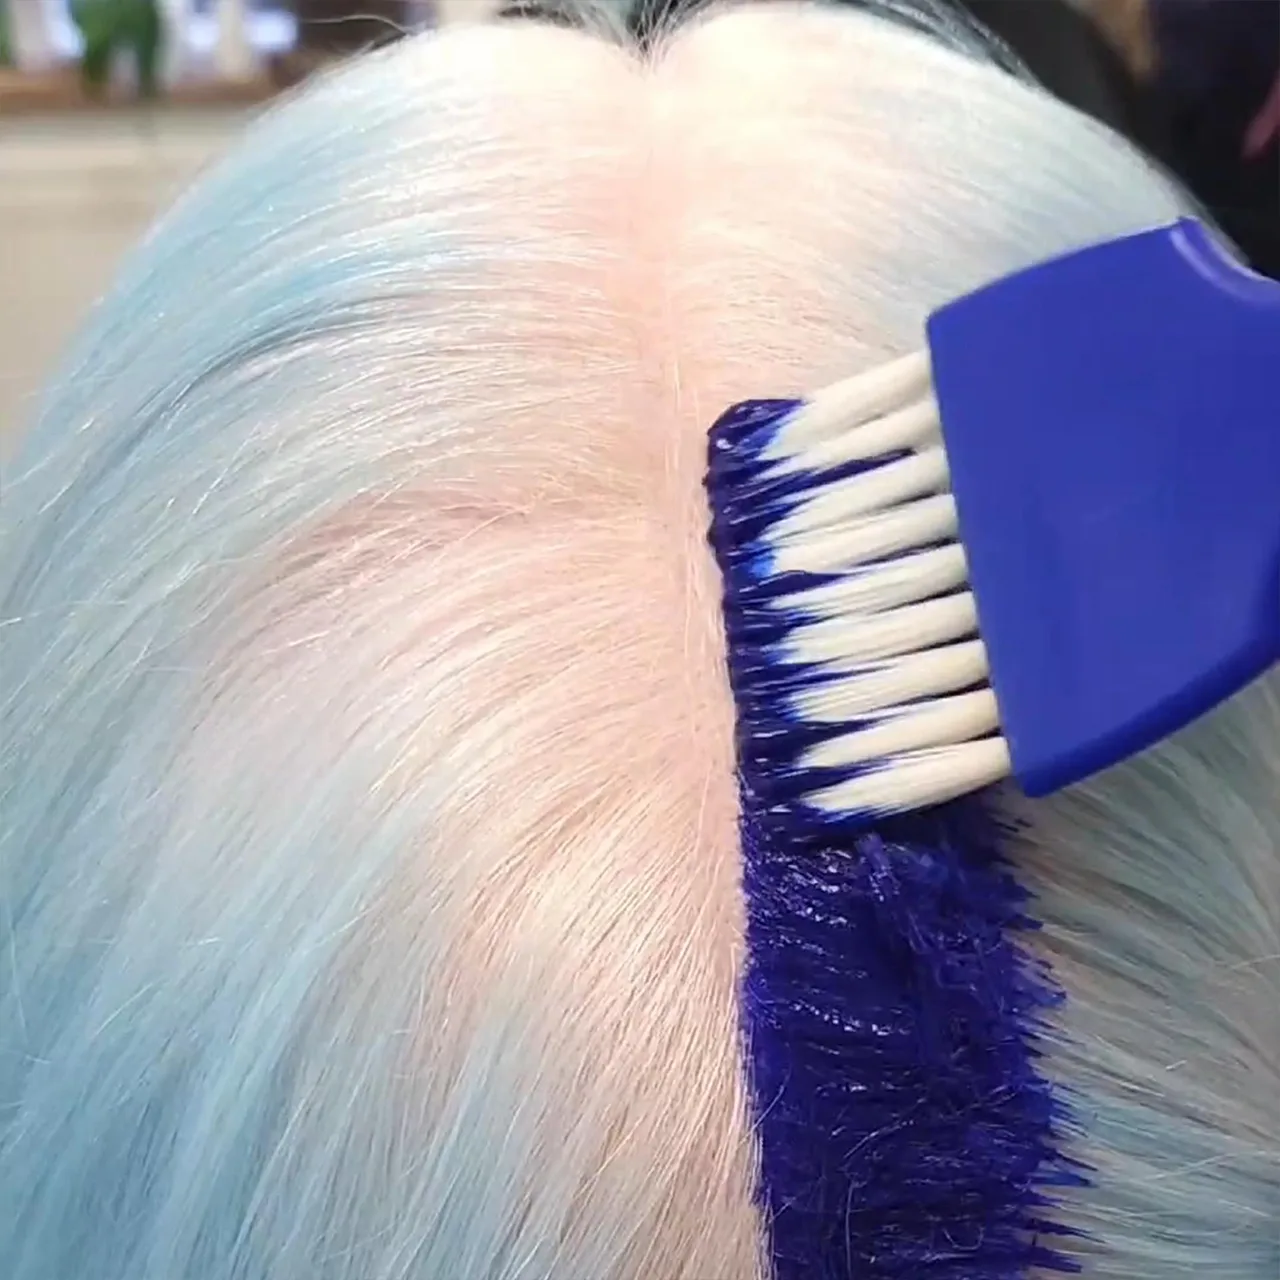 A hairstylist is applying blue hair dye to his client